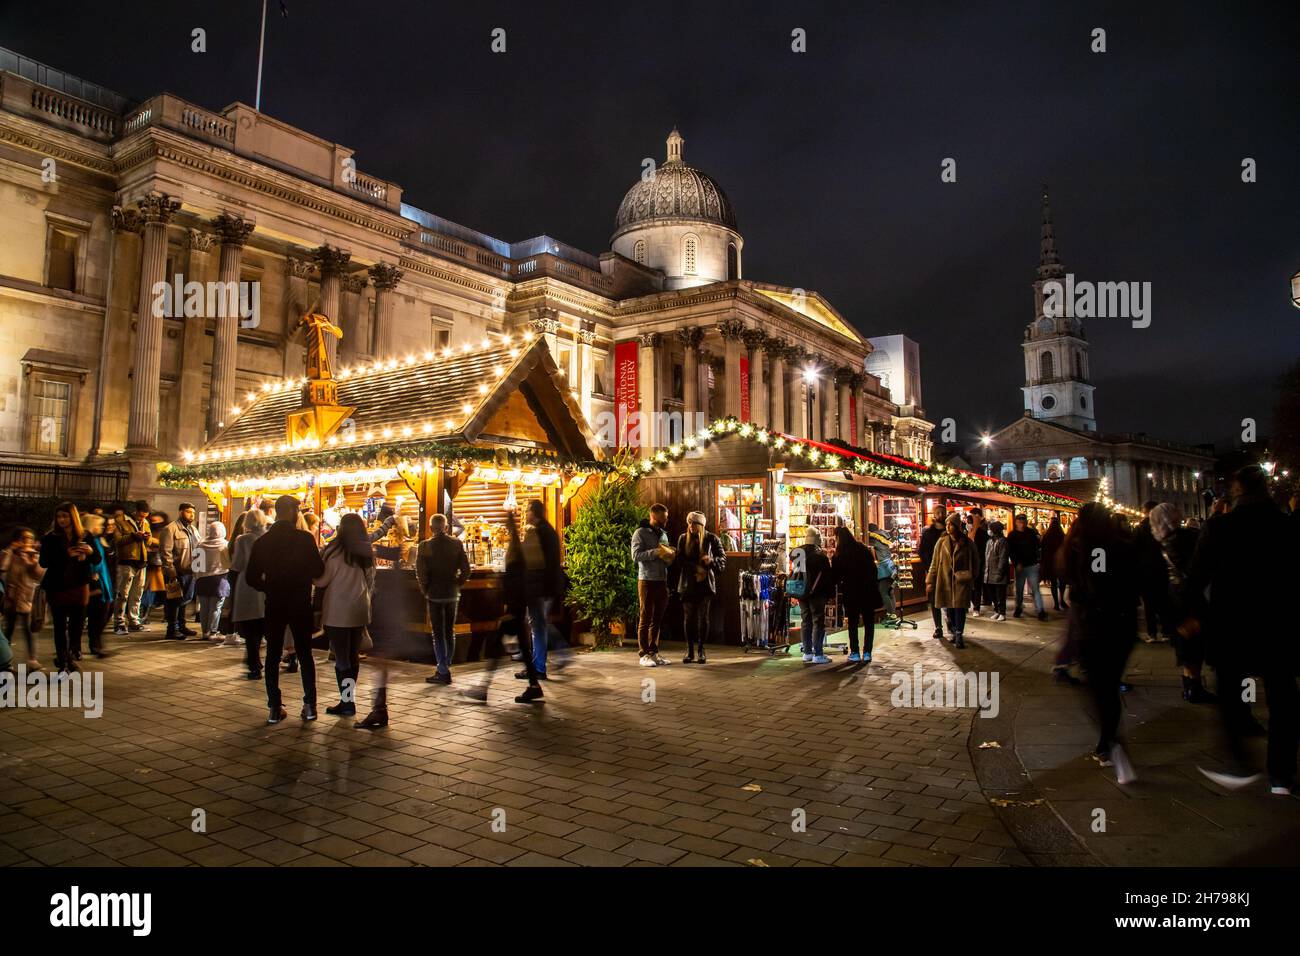 LONDON, UK - 20TH NOV 2021: Christmas markets and stalls outside the National Gallery in Trafalgar Square. Lots of people can be seen. Stock Photo